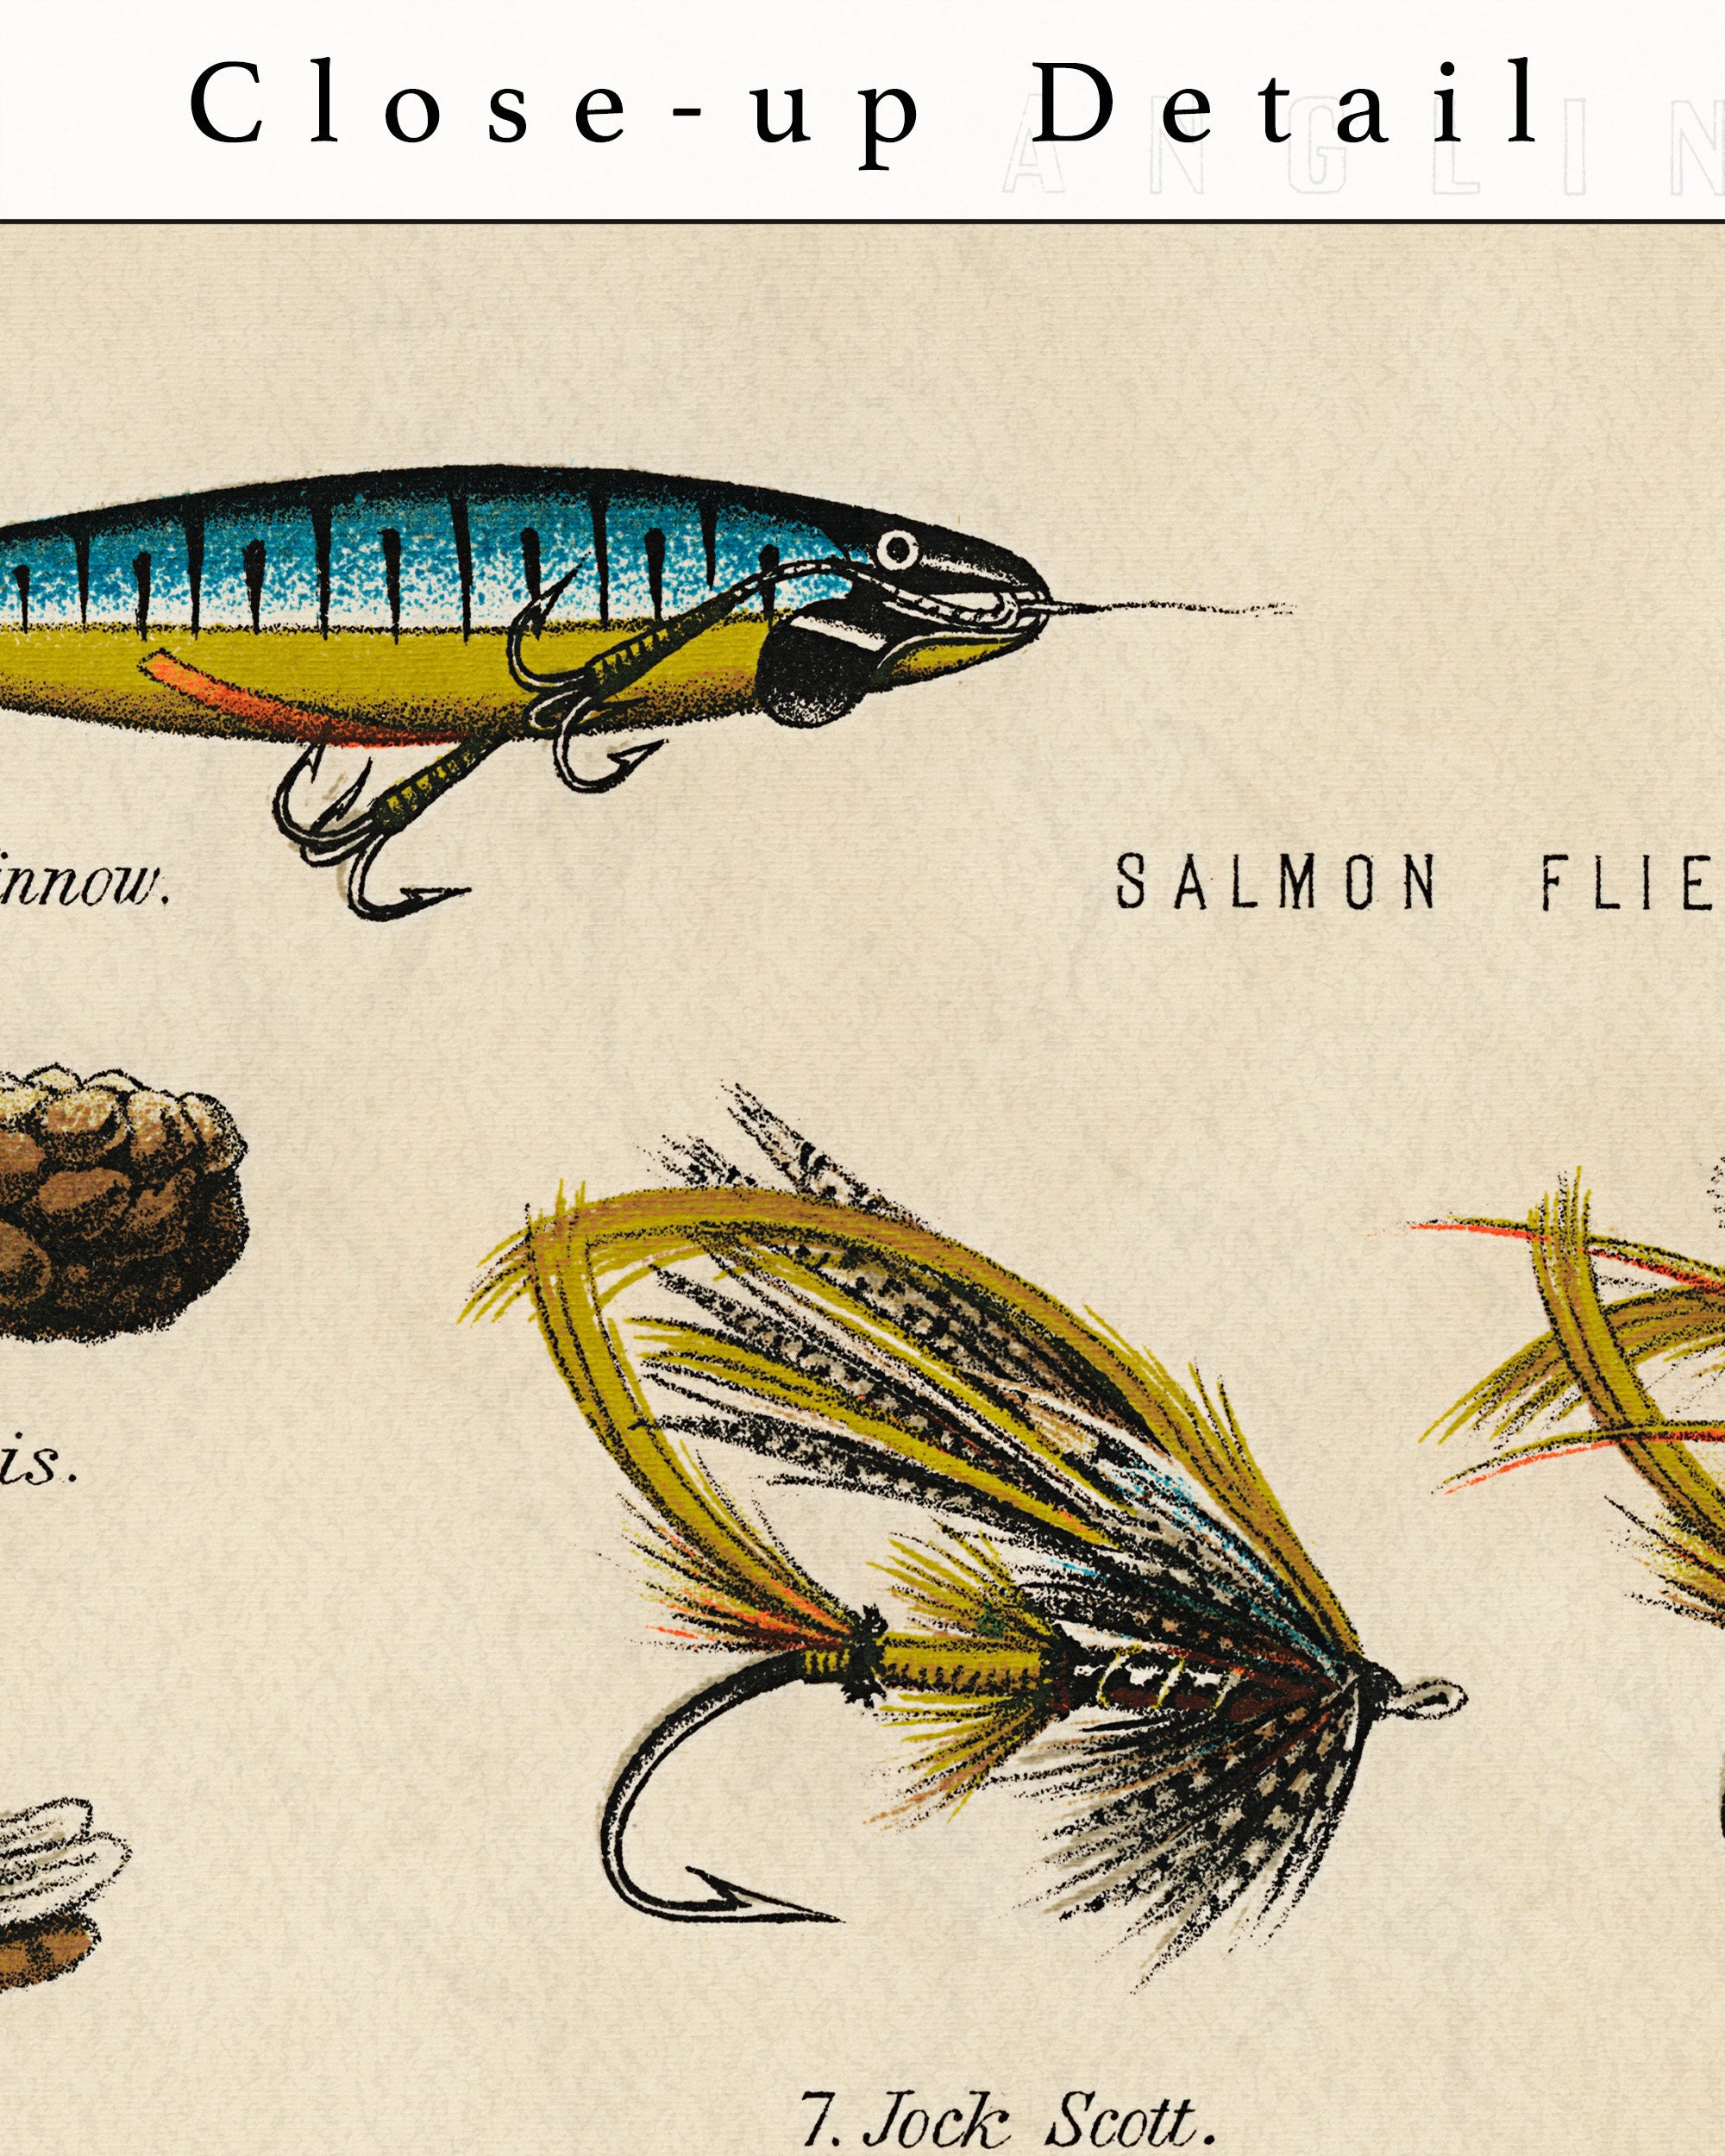 Vintage Fly Fishing Retro Poster from Century Printable, Fly Fishing Book,  Fishing Lure, Trout Fishing, Fly Tie Tool Print Canvas Painting Wall Art